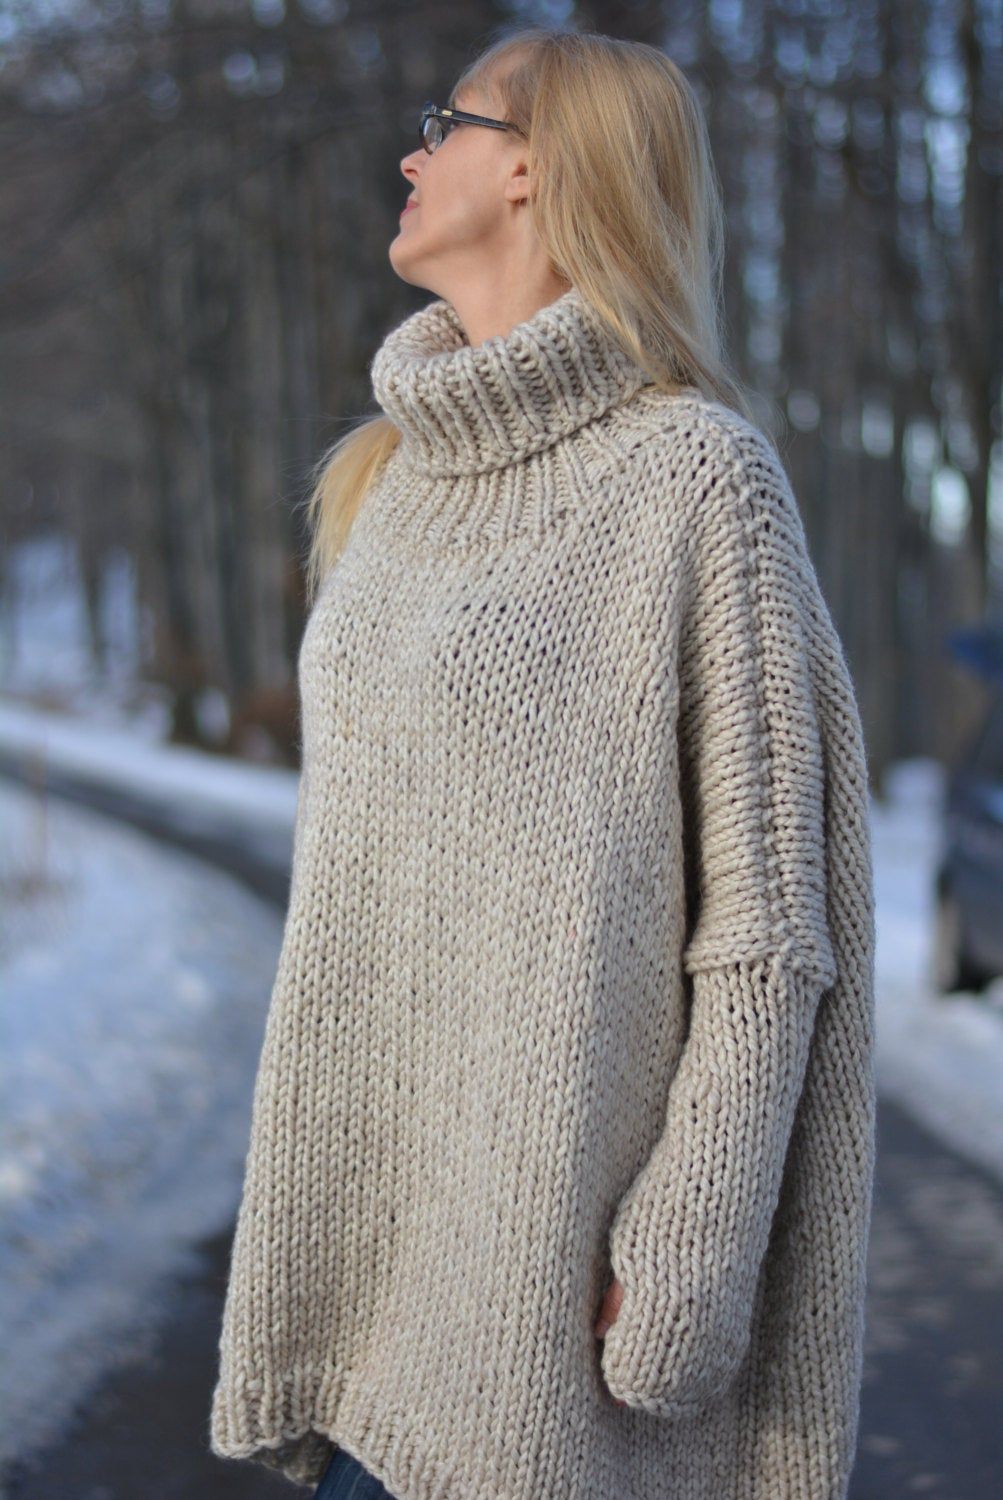 Slouchy Sweater Outfit Ideas
  for Ladies